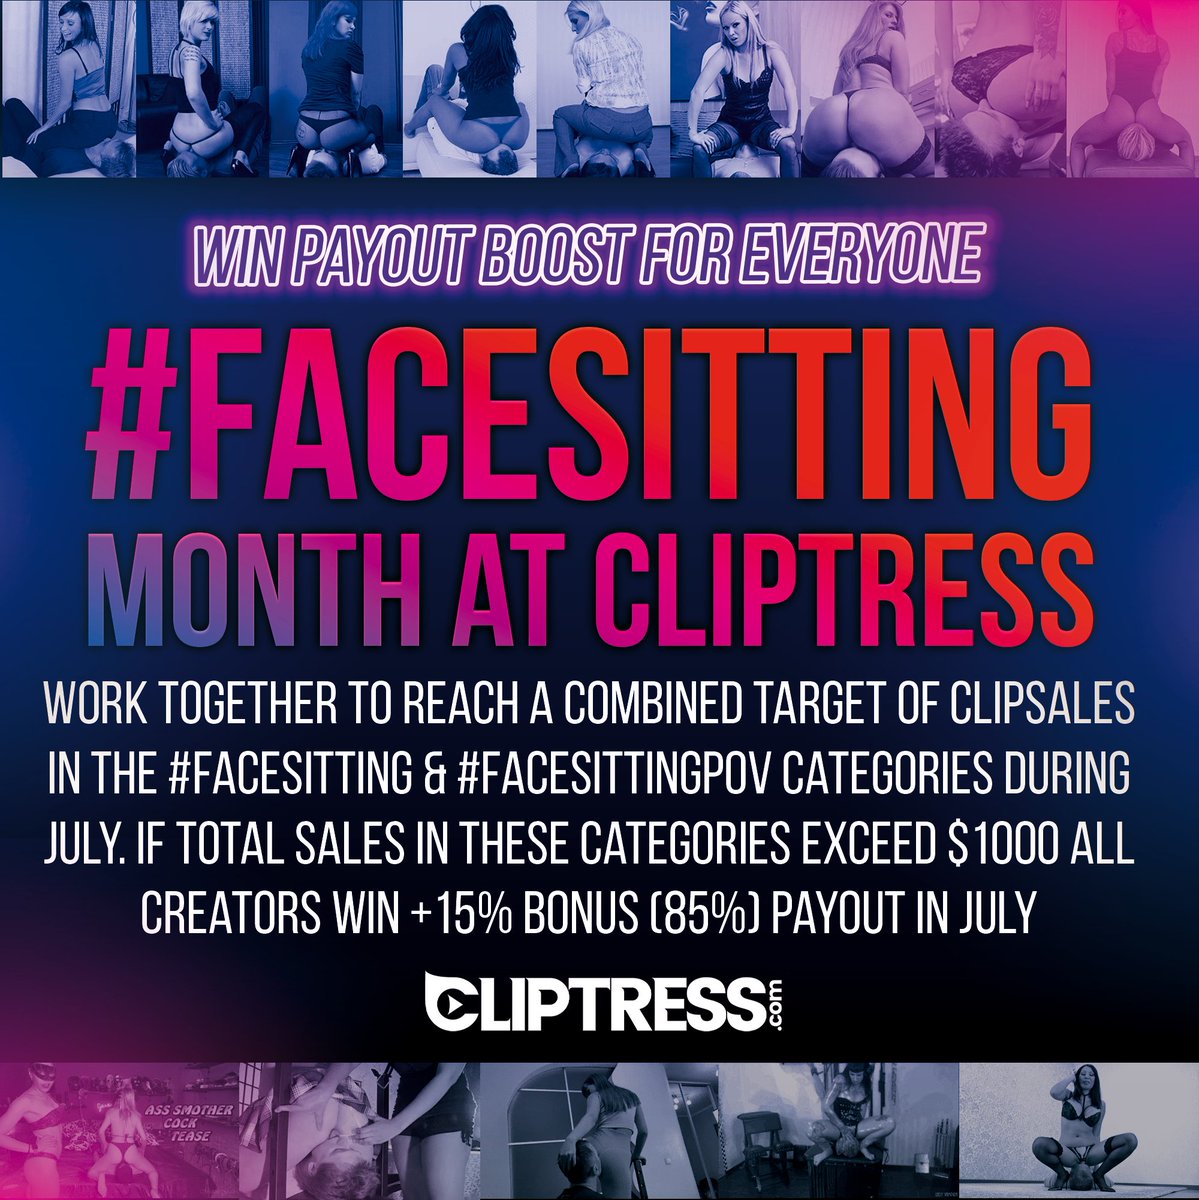 This month is FACE SITTING month at Cliptress and you can win a payout boost! 🔥 Work together towards a combined target of clip sales in the #Facesitting & FacesittingPOV categories, if sales exceed $1000 all creators will win a 15% payout boost on all clip sales in July 😍